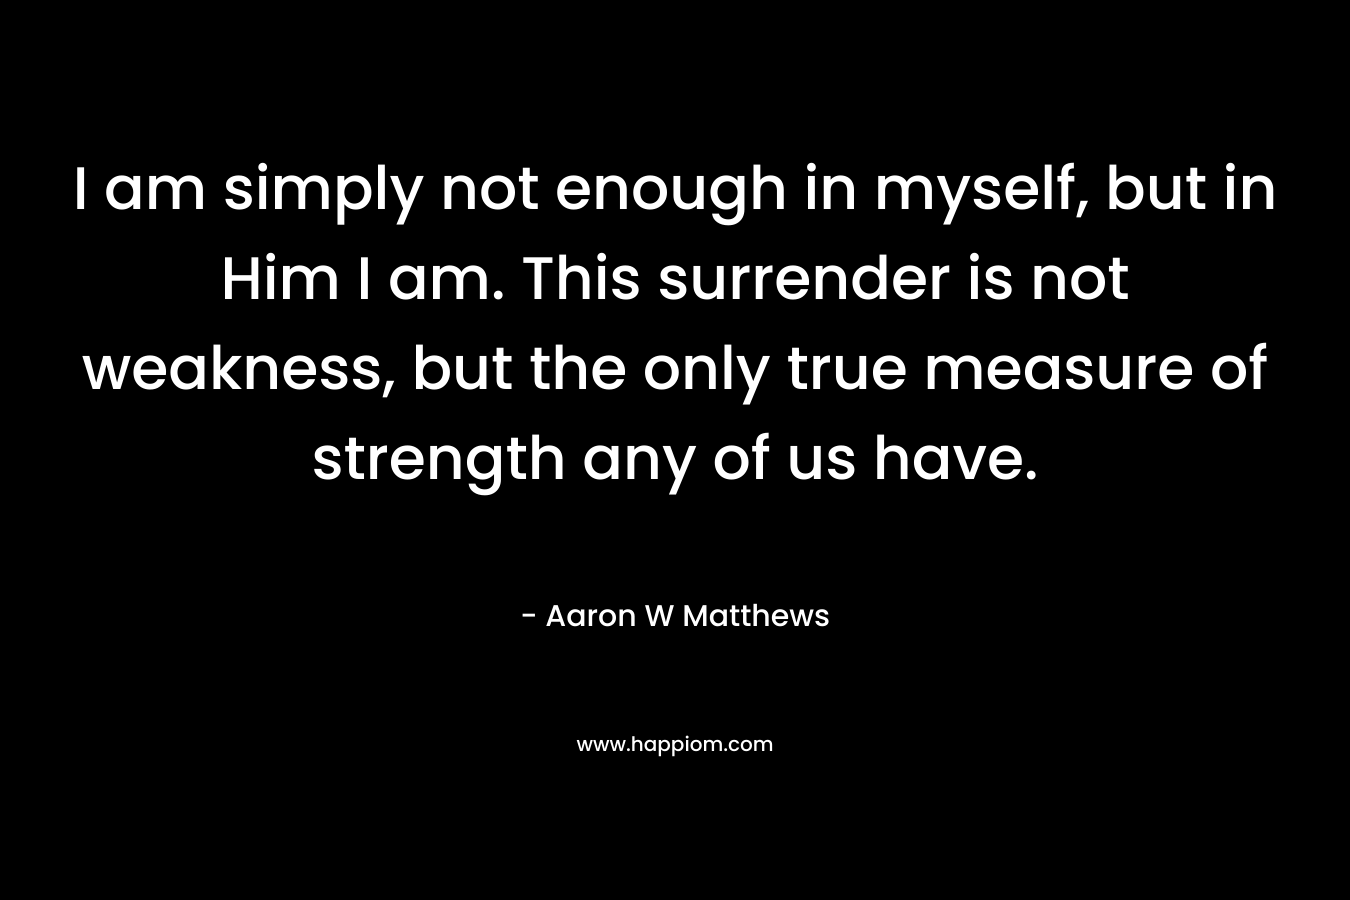 I am simply not enough in myself, but in Him I am. This surrender is not weakness, but the only true measure of strength any of us have. – Aaron W Matthews